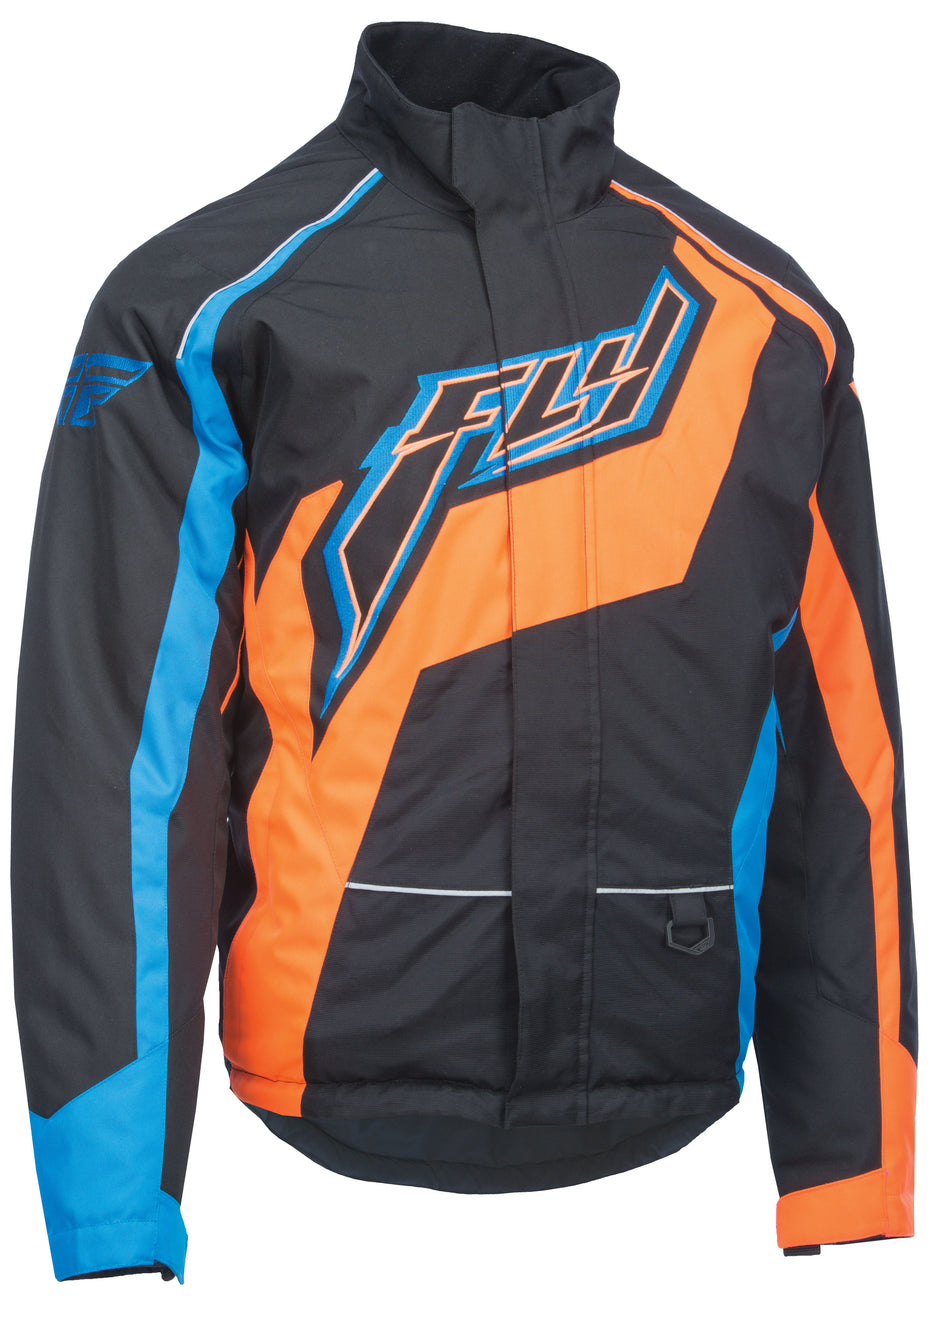 FLY RACING Fly Outpost Jacket Black/Orange/Blue Xl #6152 470-4018X